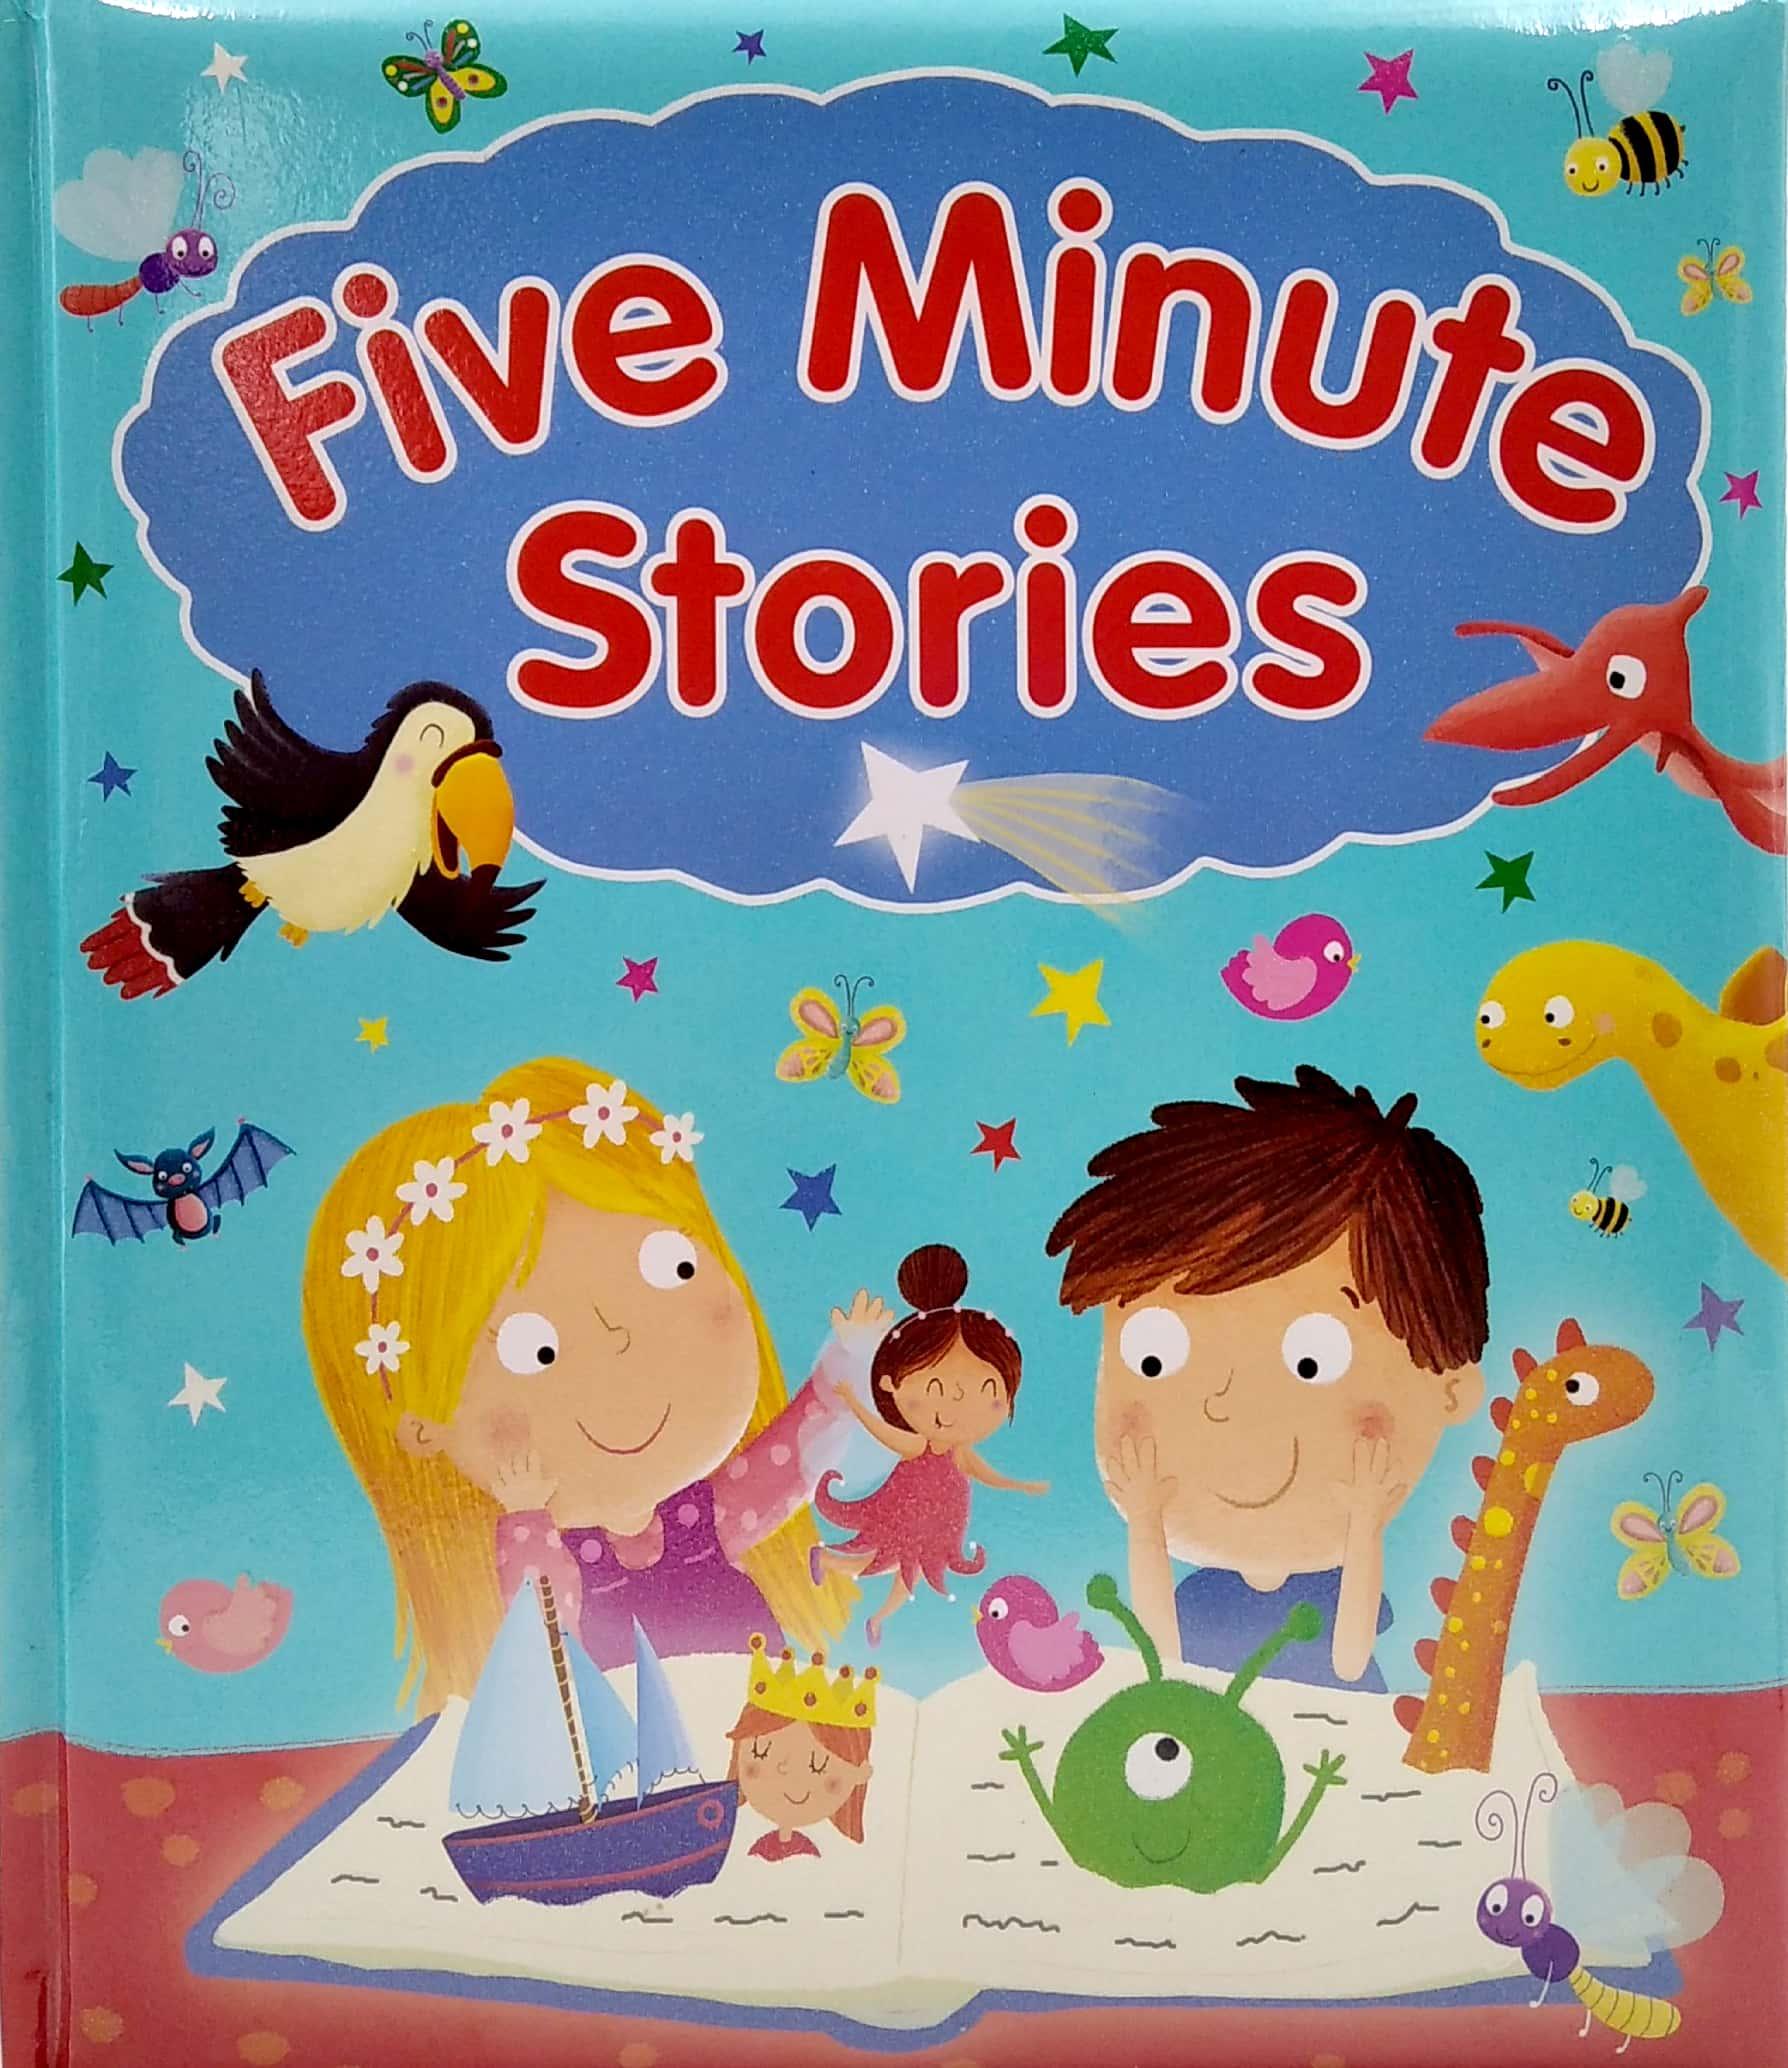 Five Minute Stories (Padded)